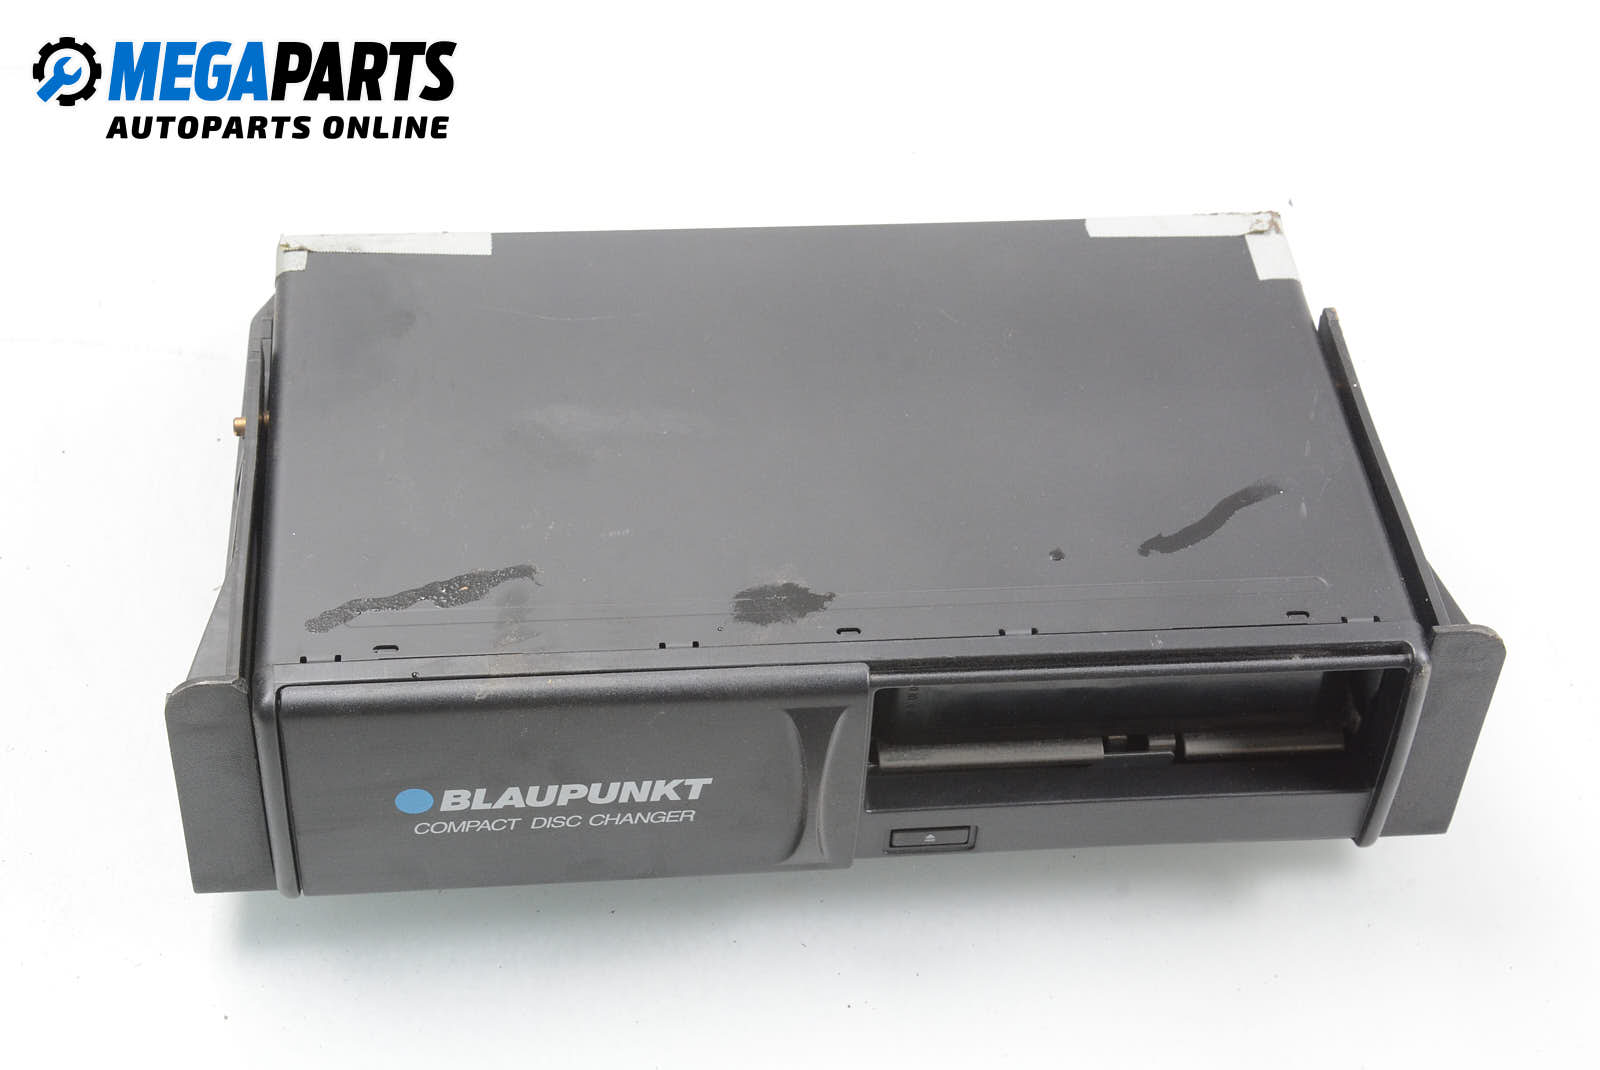 Embezzle Install planter CD changer for Opel Astra G (1998-2009) Price: € 13.63